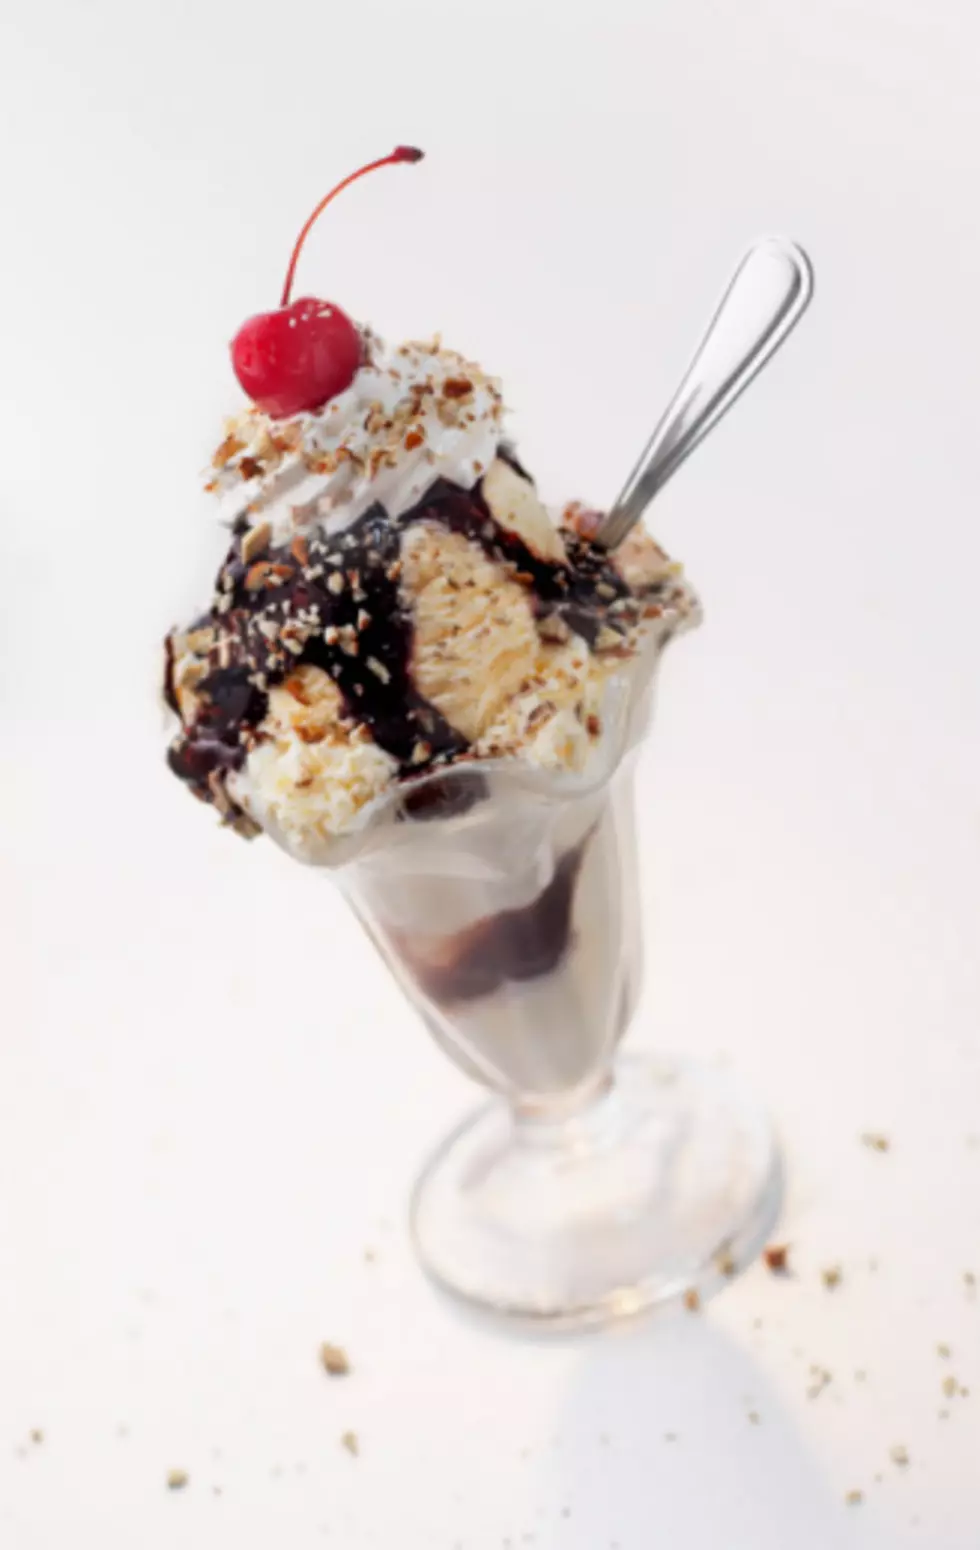 Man Outraged That His Sundae Had Fudge on the Bottom- Say &#8220;What!?&#8221;